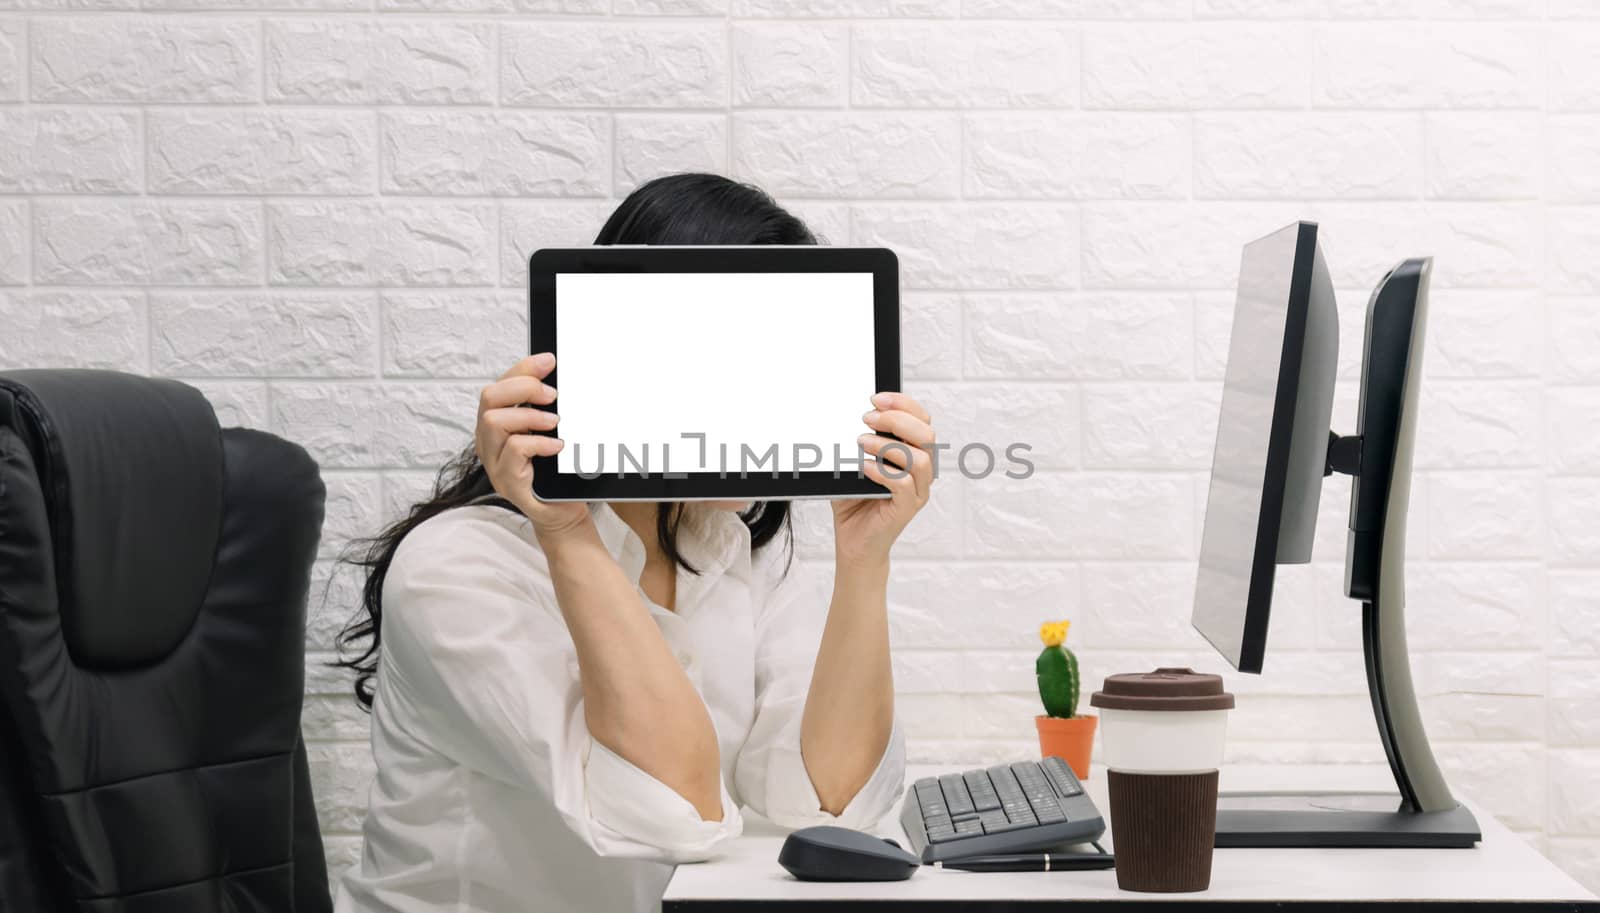 A woman with a tablet show on the desk